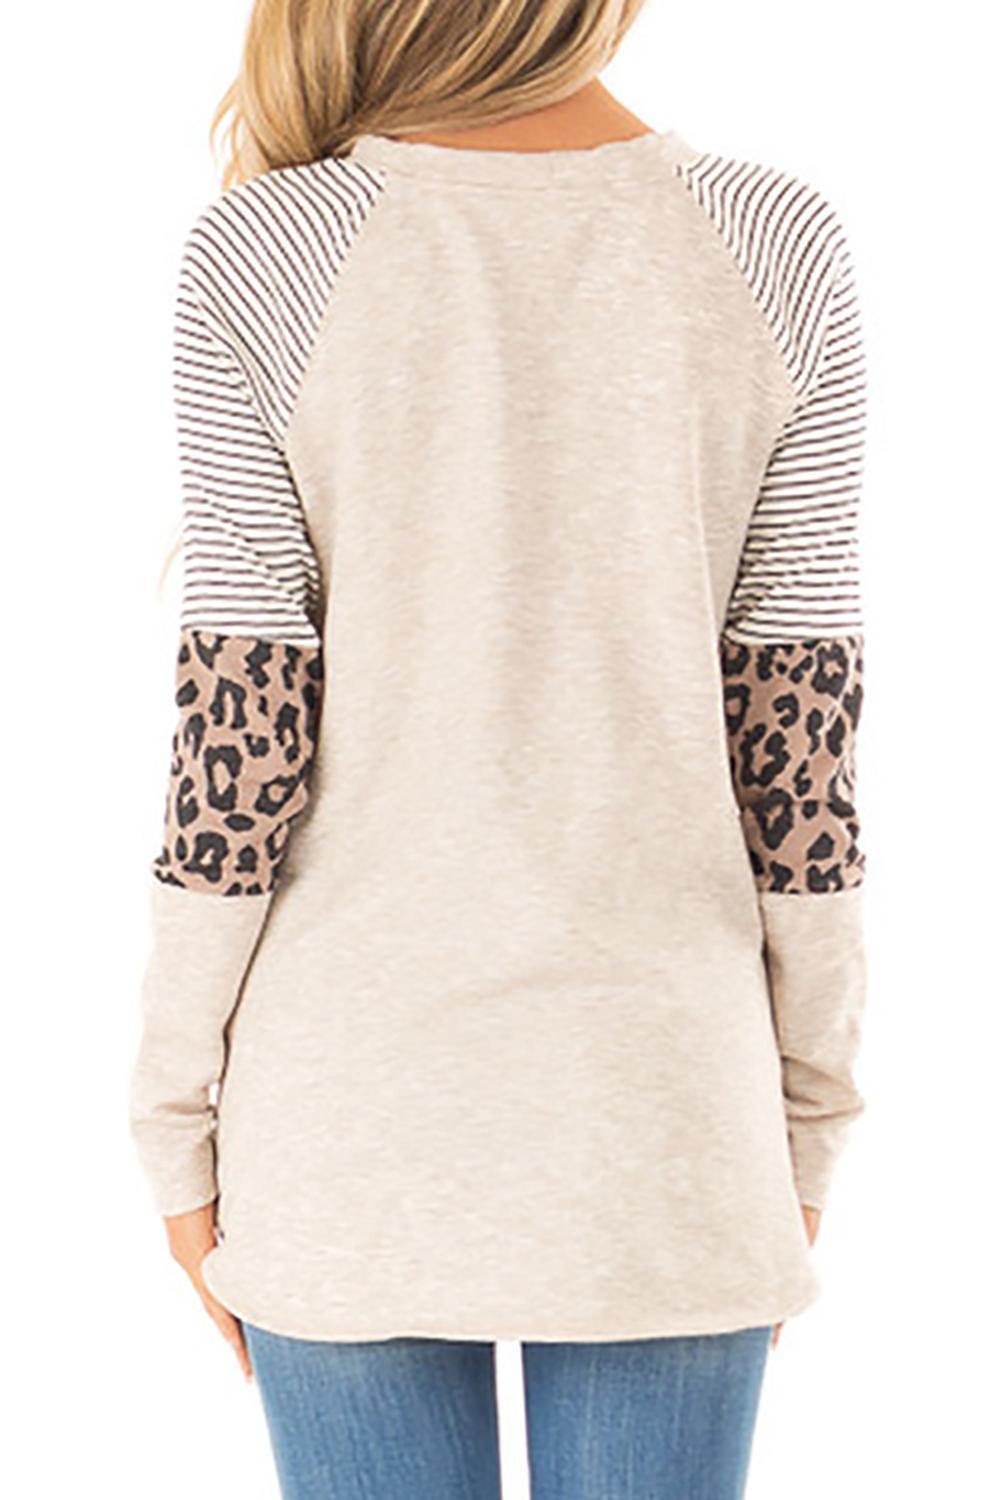 Khaki Striped and Leopard Color Block Sleeves Top - L & M Kee, LLC